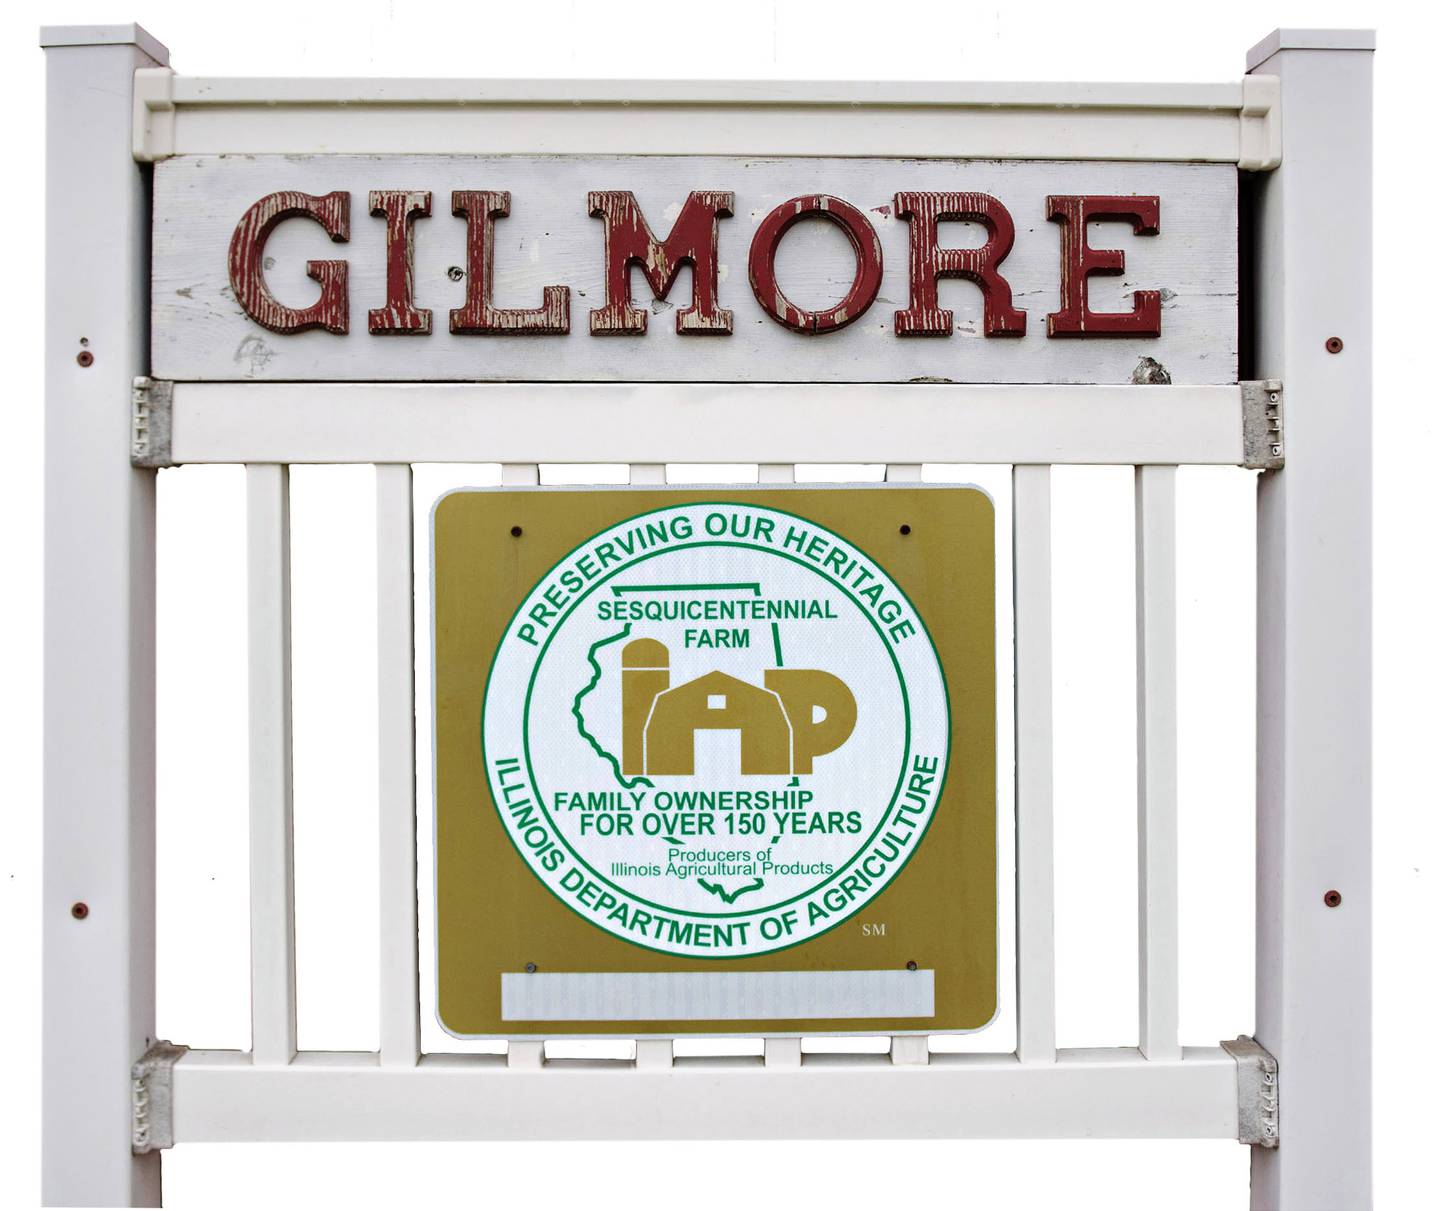 A plaque from the Illinois Department of Agriculture recognizes the Gilmore farm as being a sesquicentennial family farm.